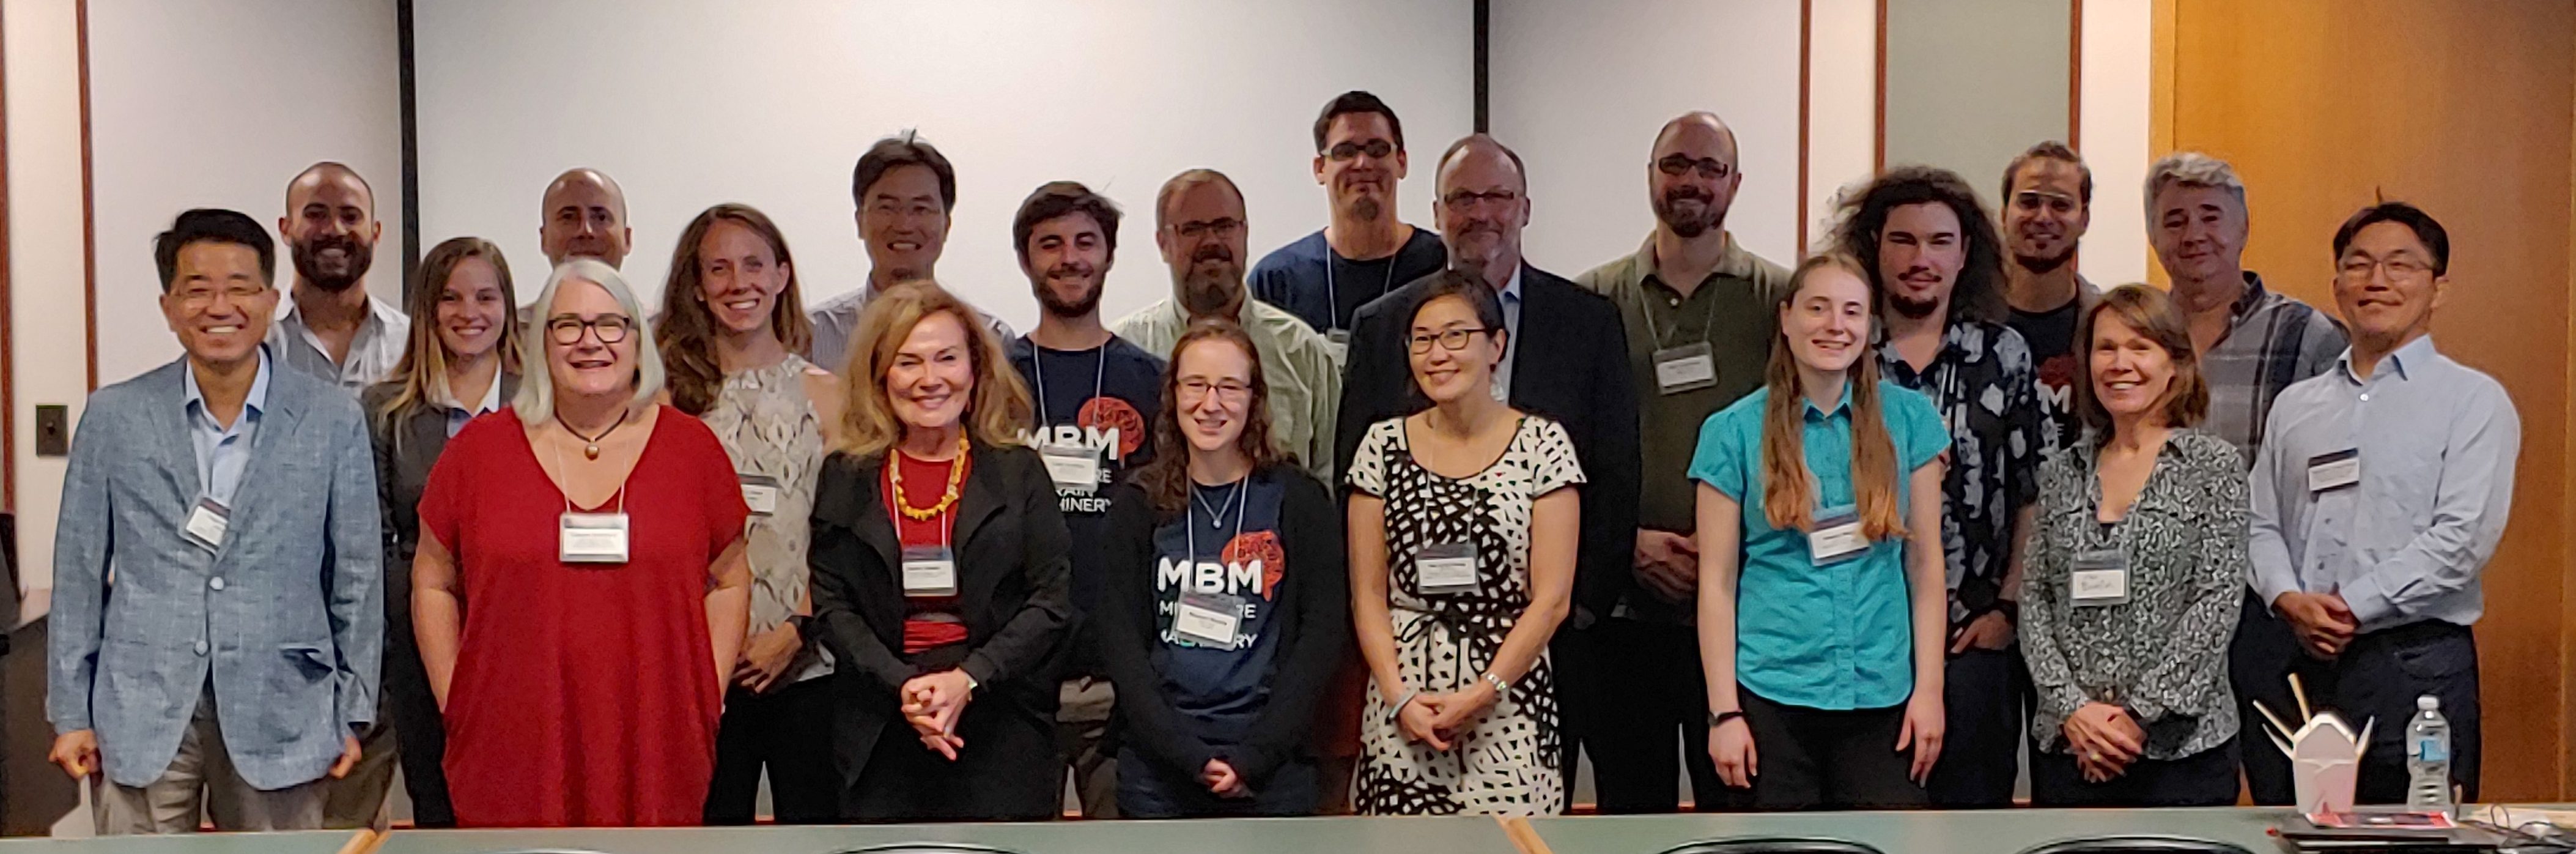 Group photo of attendees at the 2019 MBM Retreat